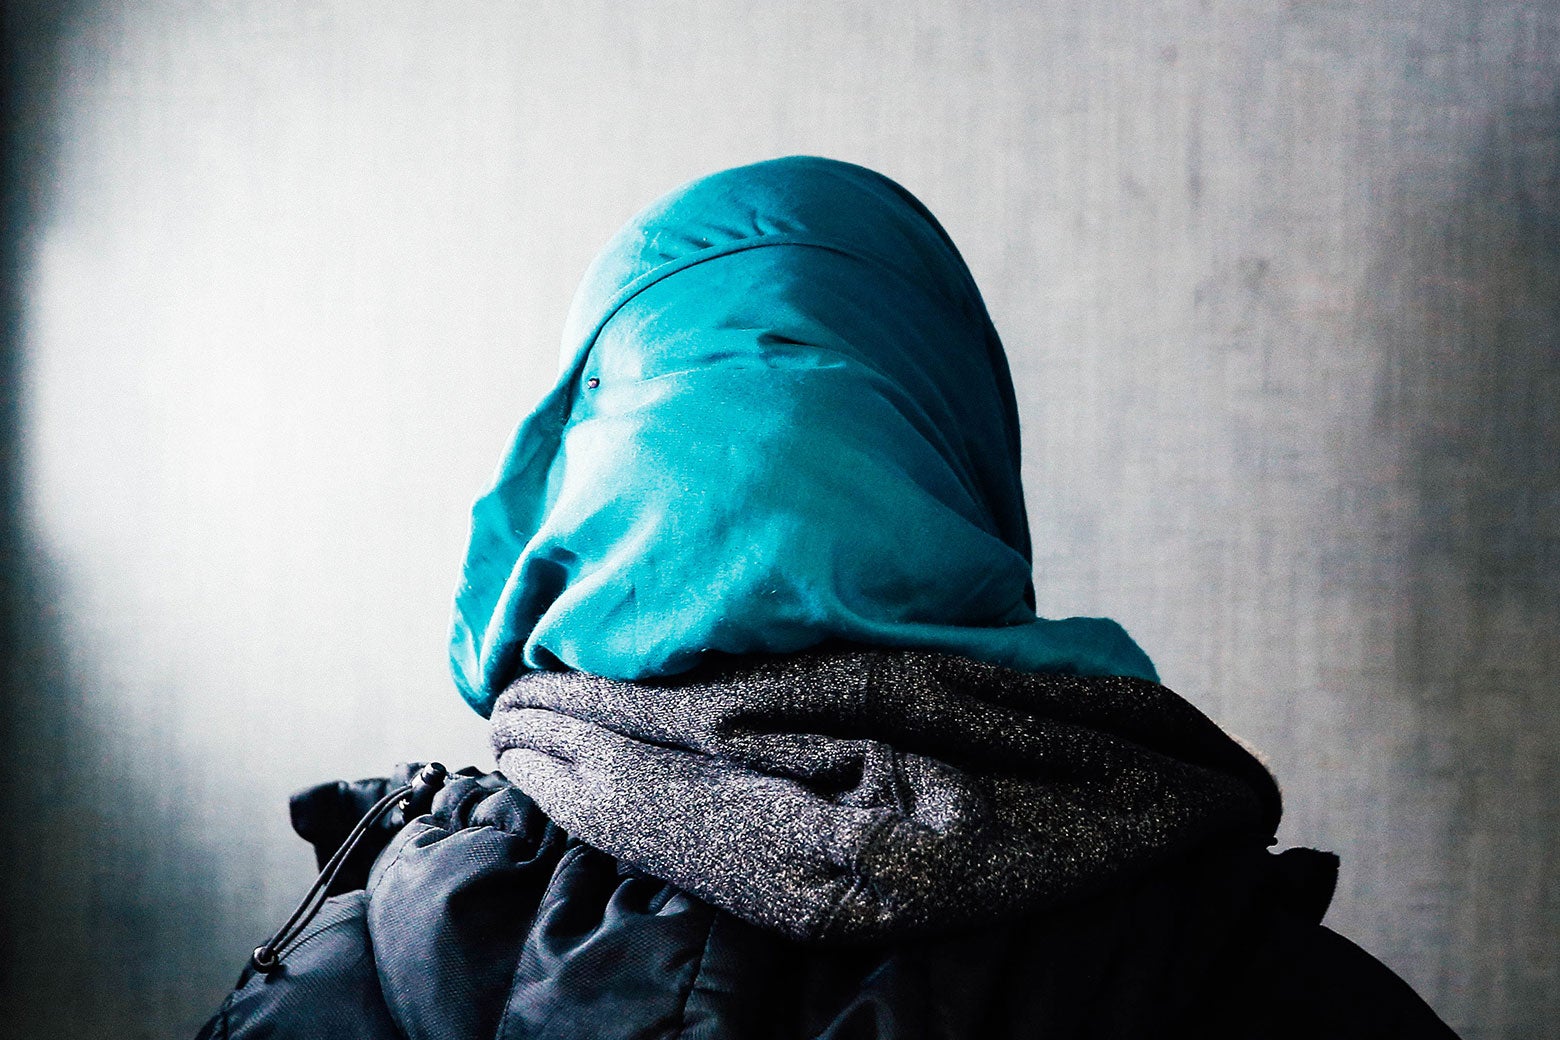 The back of the head of a woman wearing a headscarf, hoodie, and jacket.